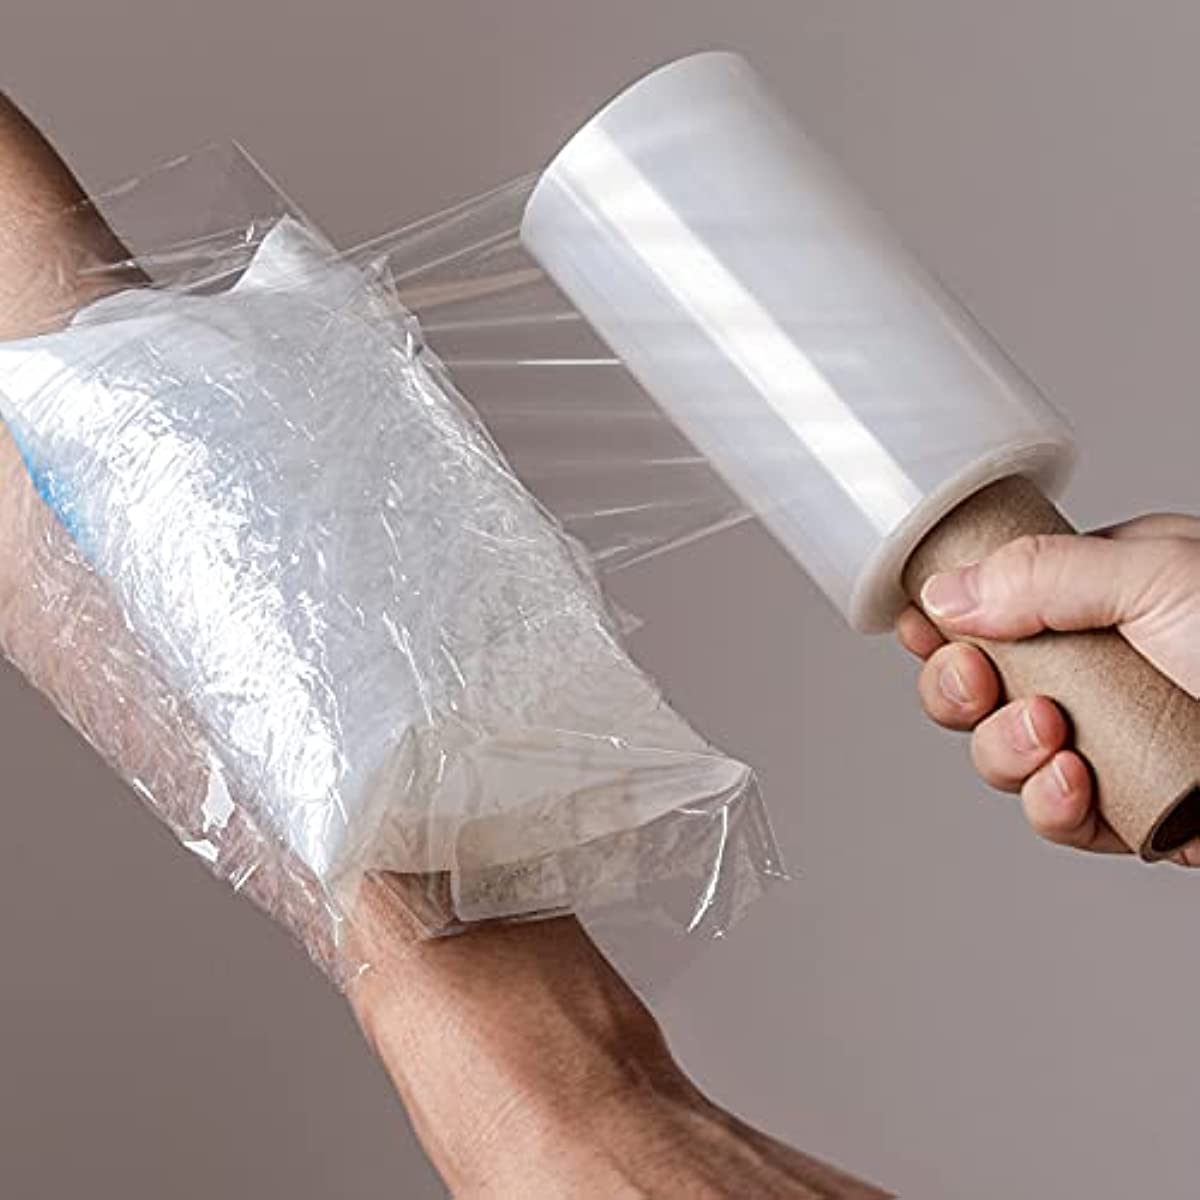 Wrap Plastic Film with Handle Plastic Bags for Ice Tattoo Plastic Wrap Suitable for Athletic Trainers to Hold Ice Packs in Place for Moving Supplies Stretch Wrap Shrink Wrap,5 Inches x 500 ft (1 Pcs)